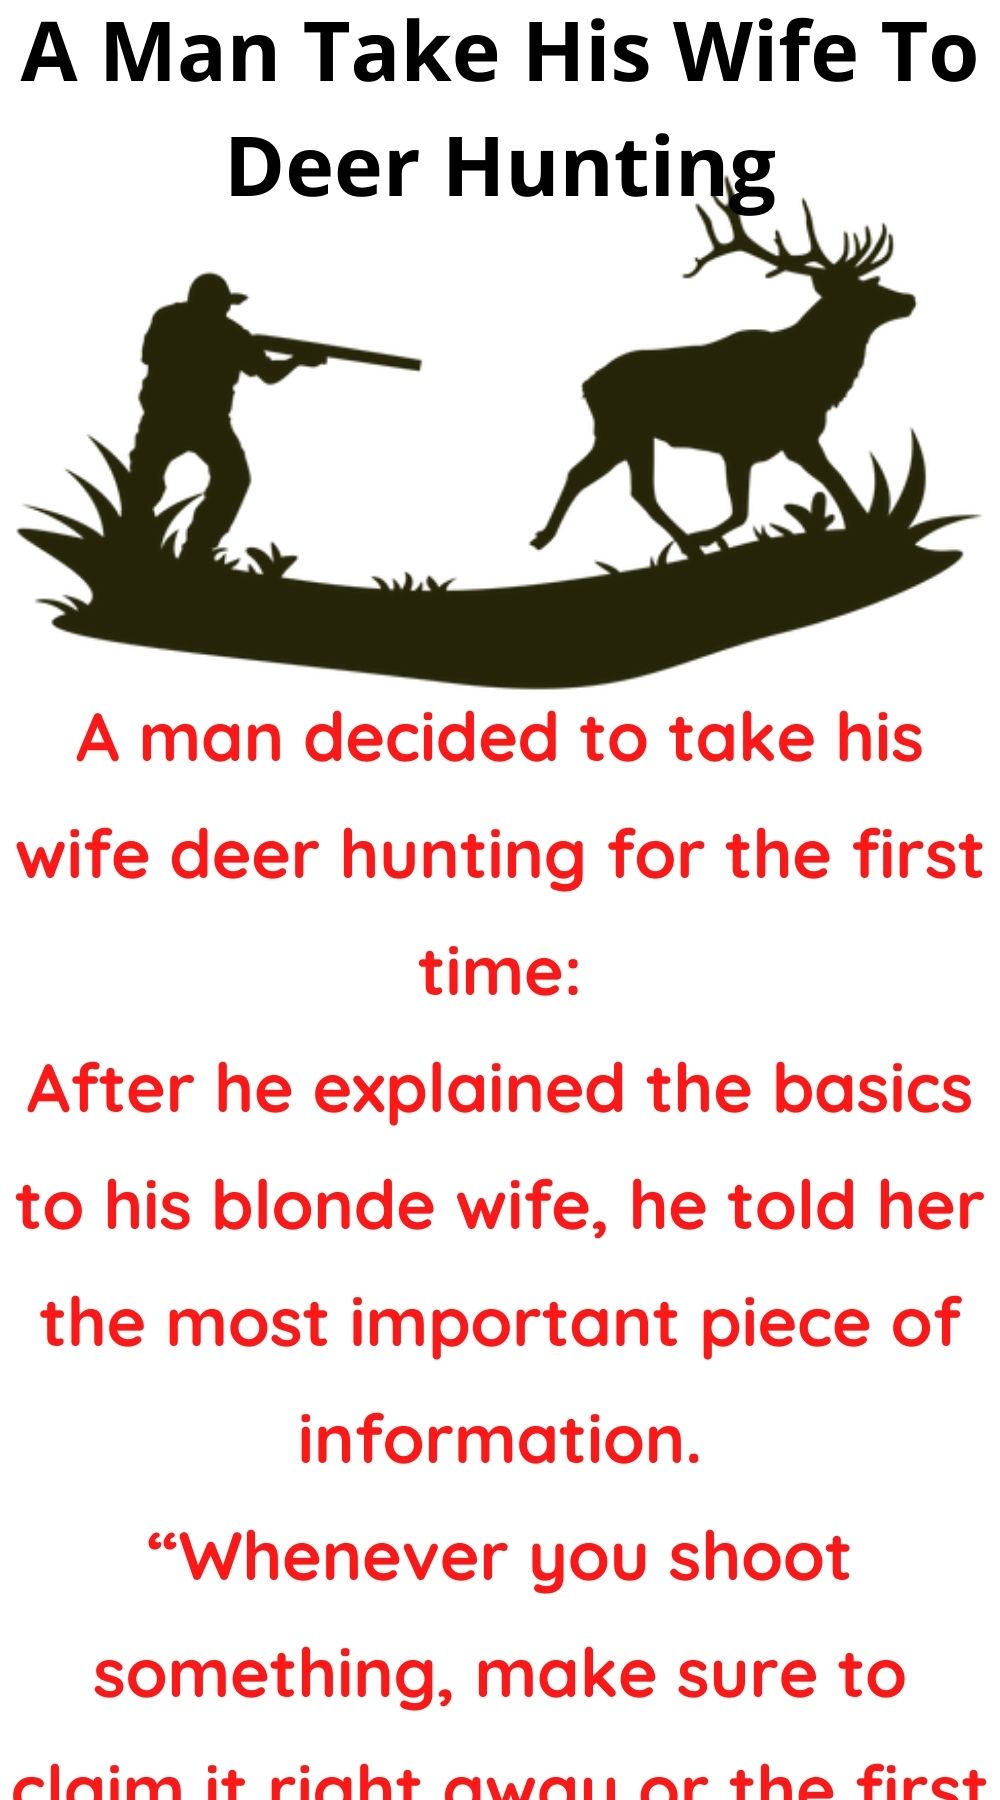 A Man Take His Wife To Deer Hunting